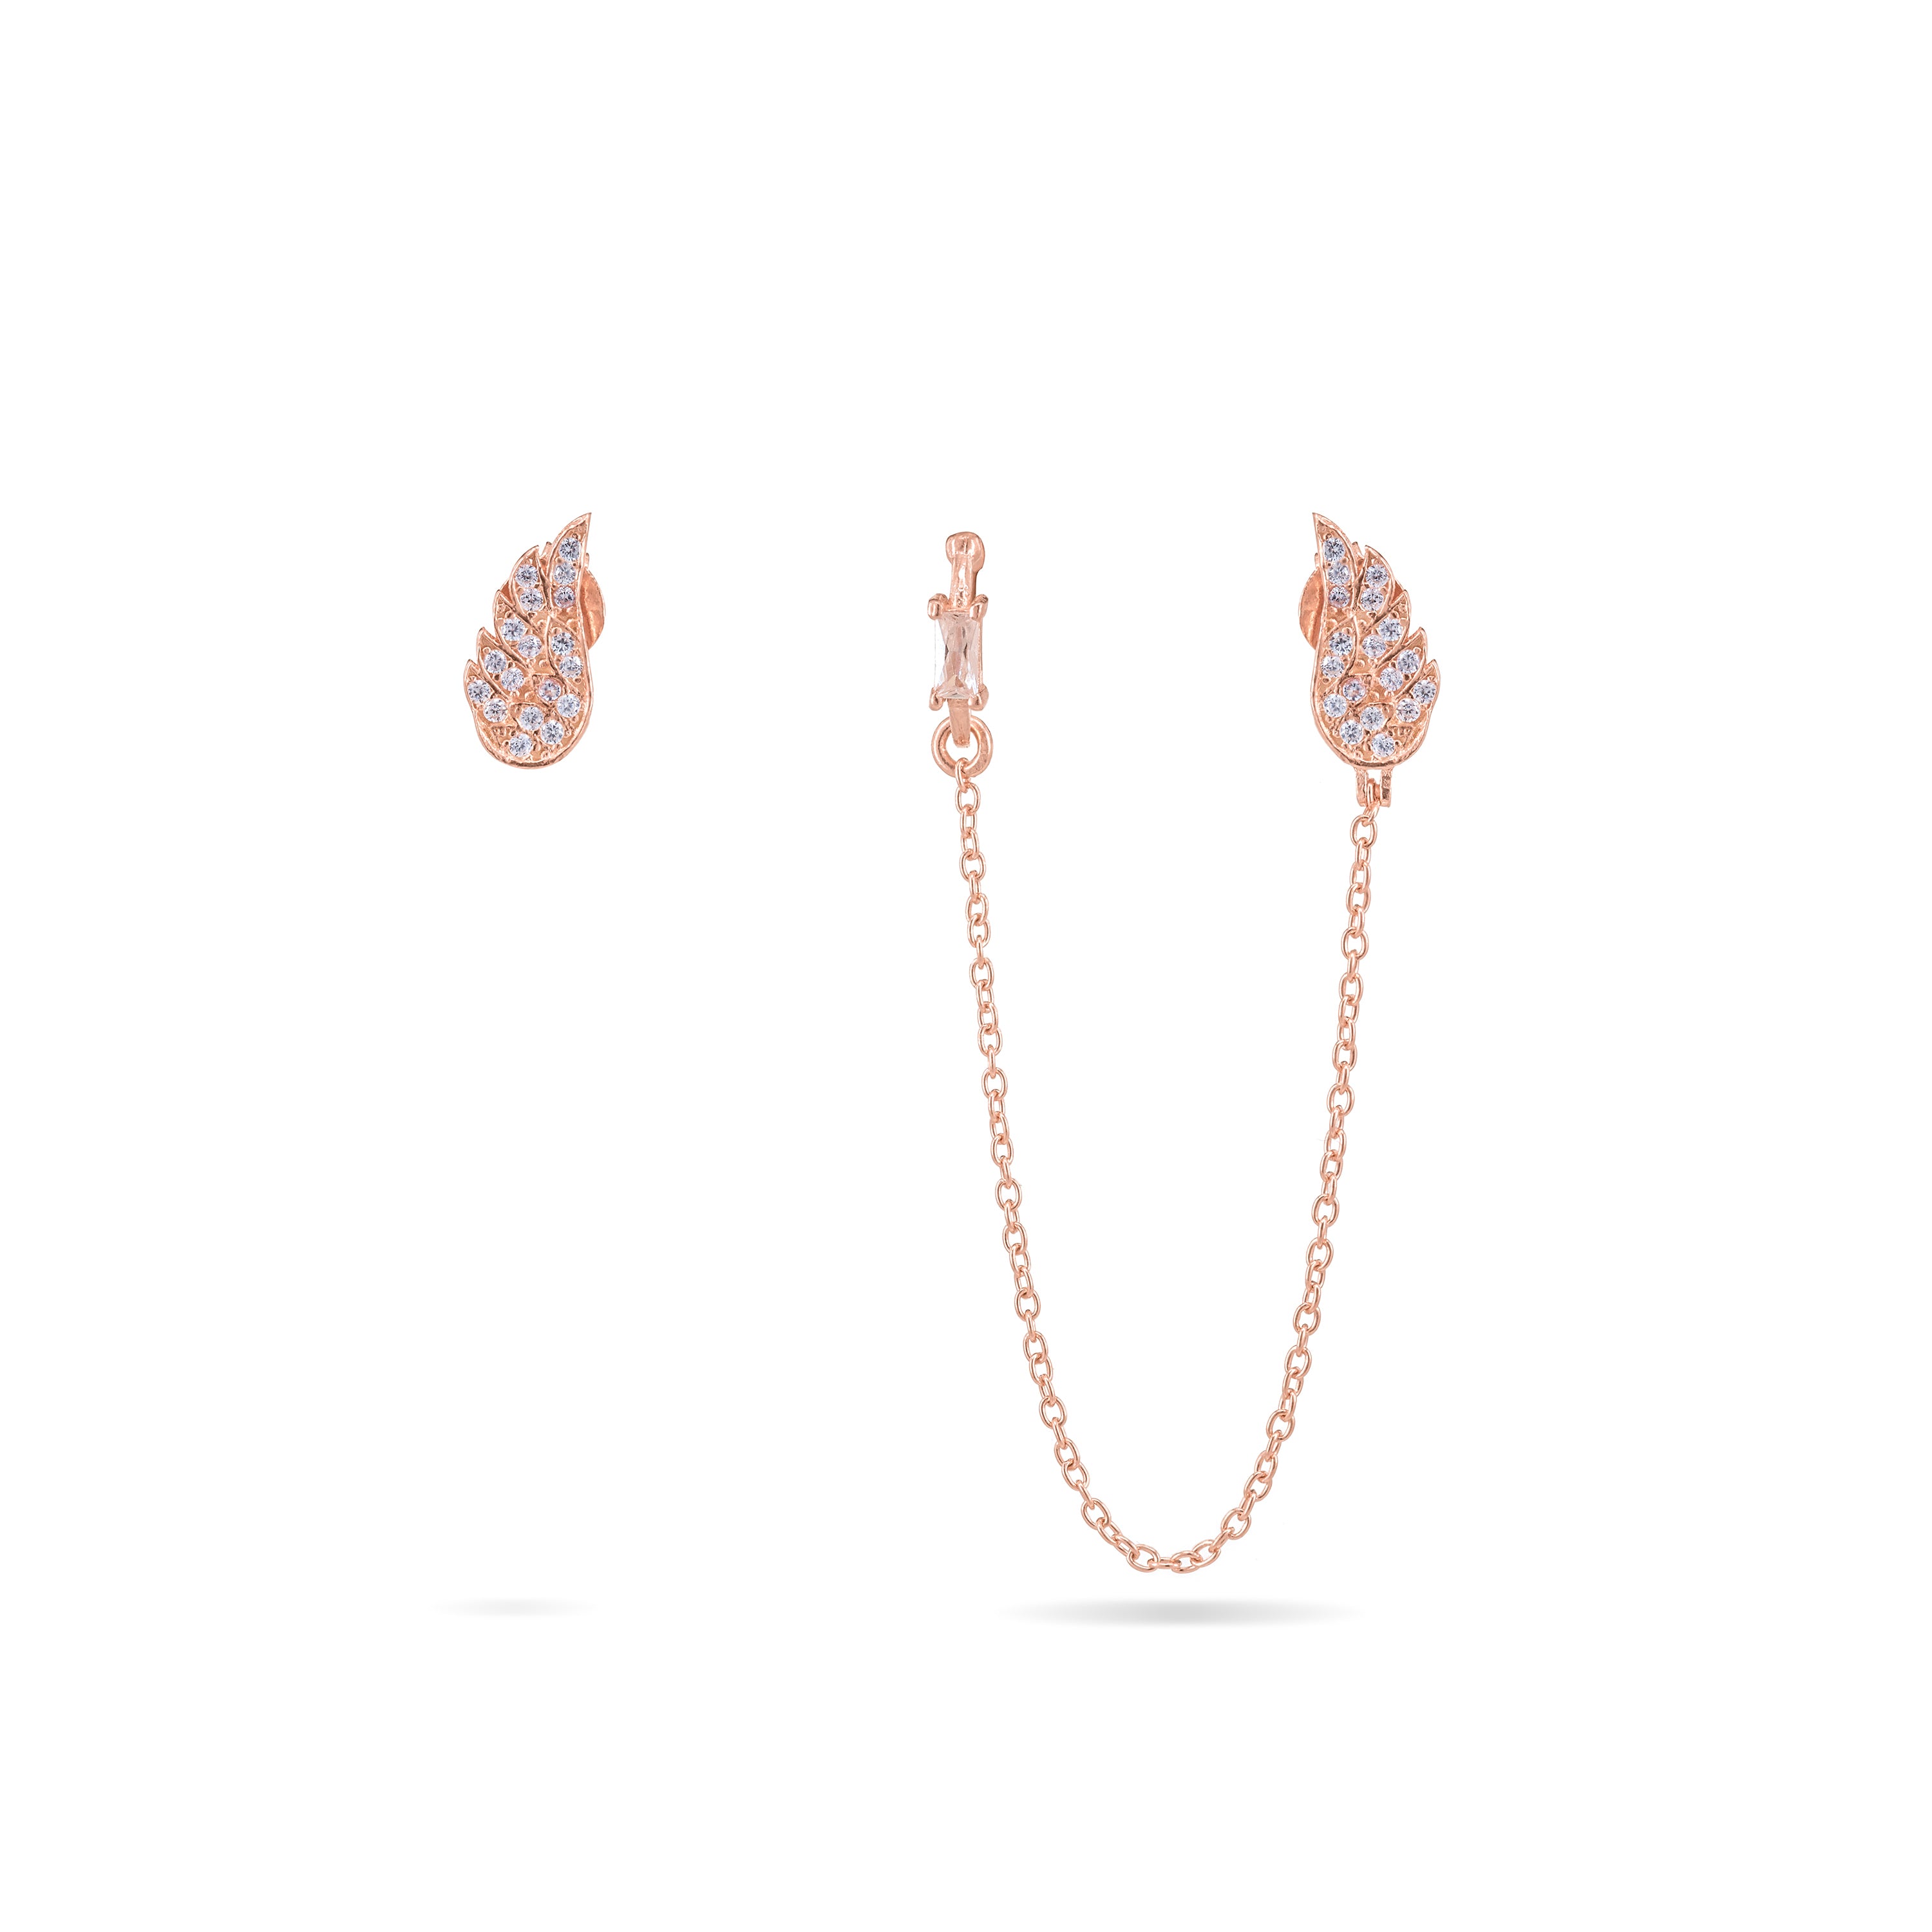 Angel Wing Chain Earring And Stud